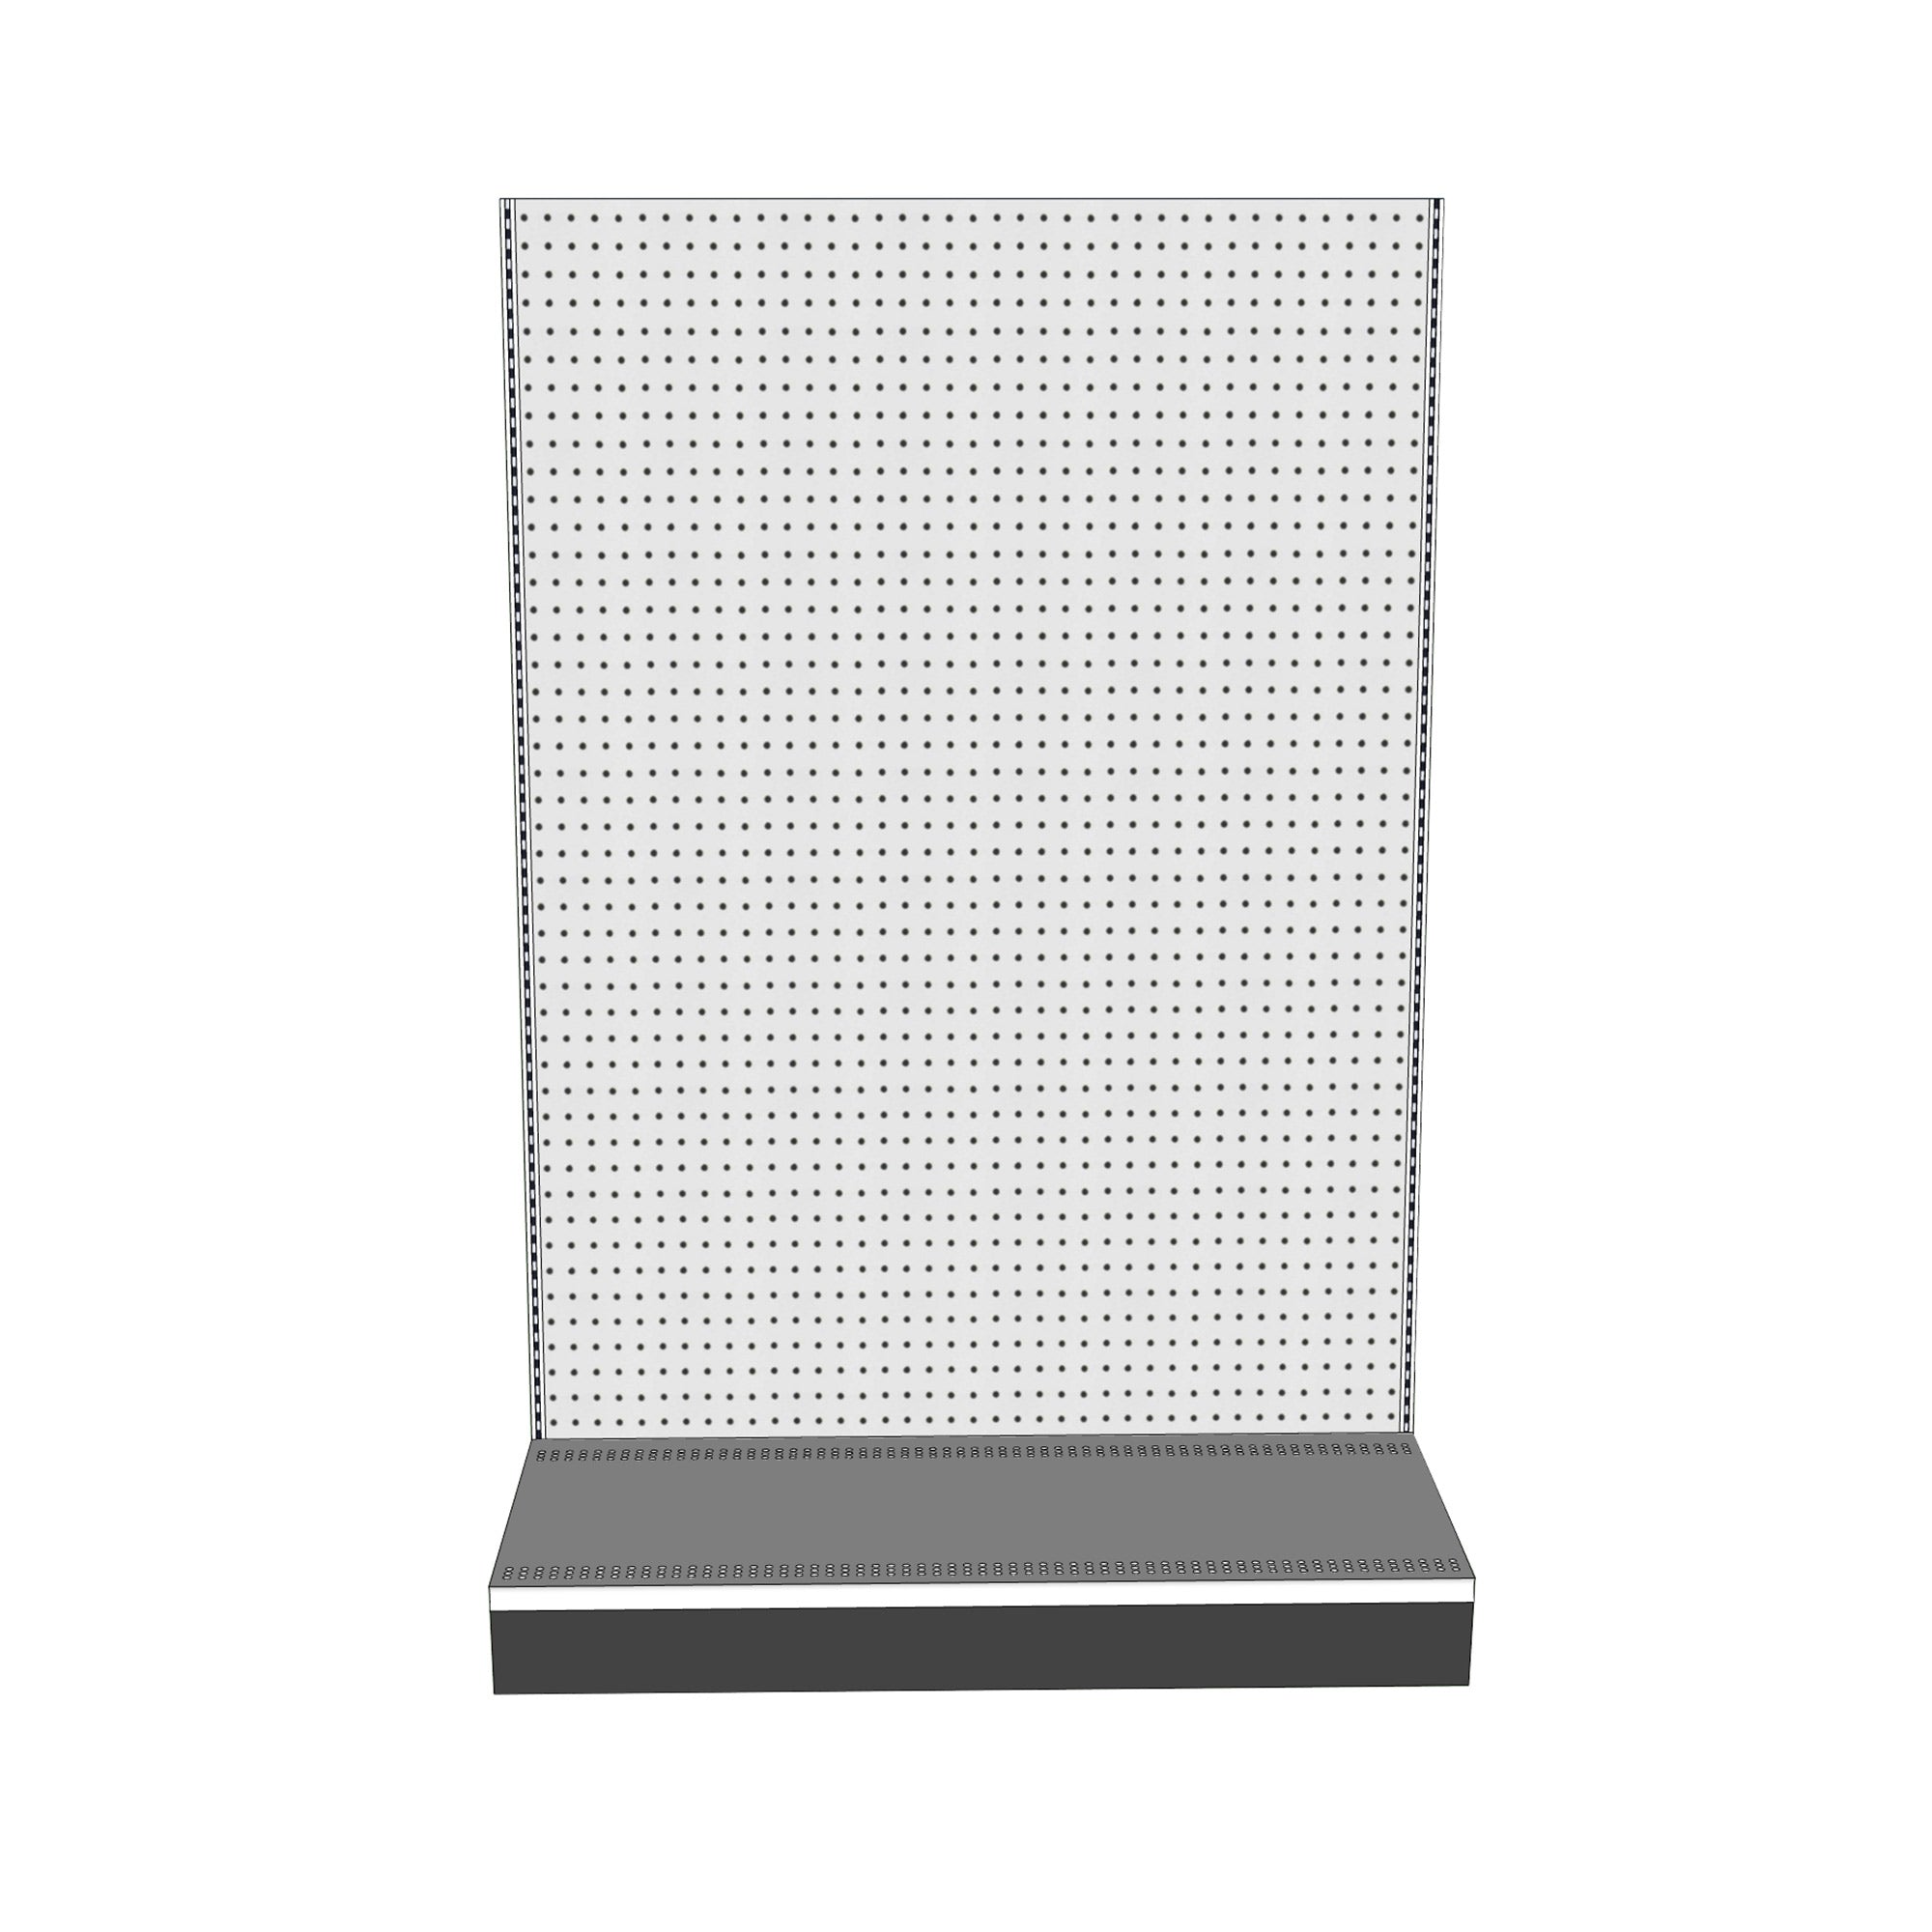 gondola shelving end cap with pegboard back